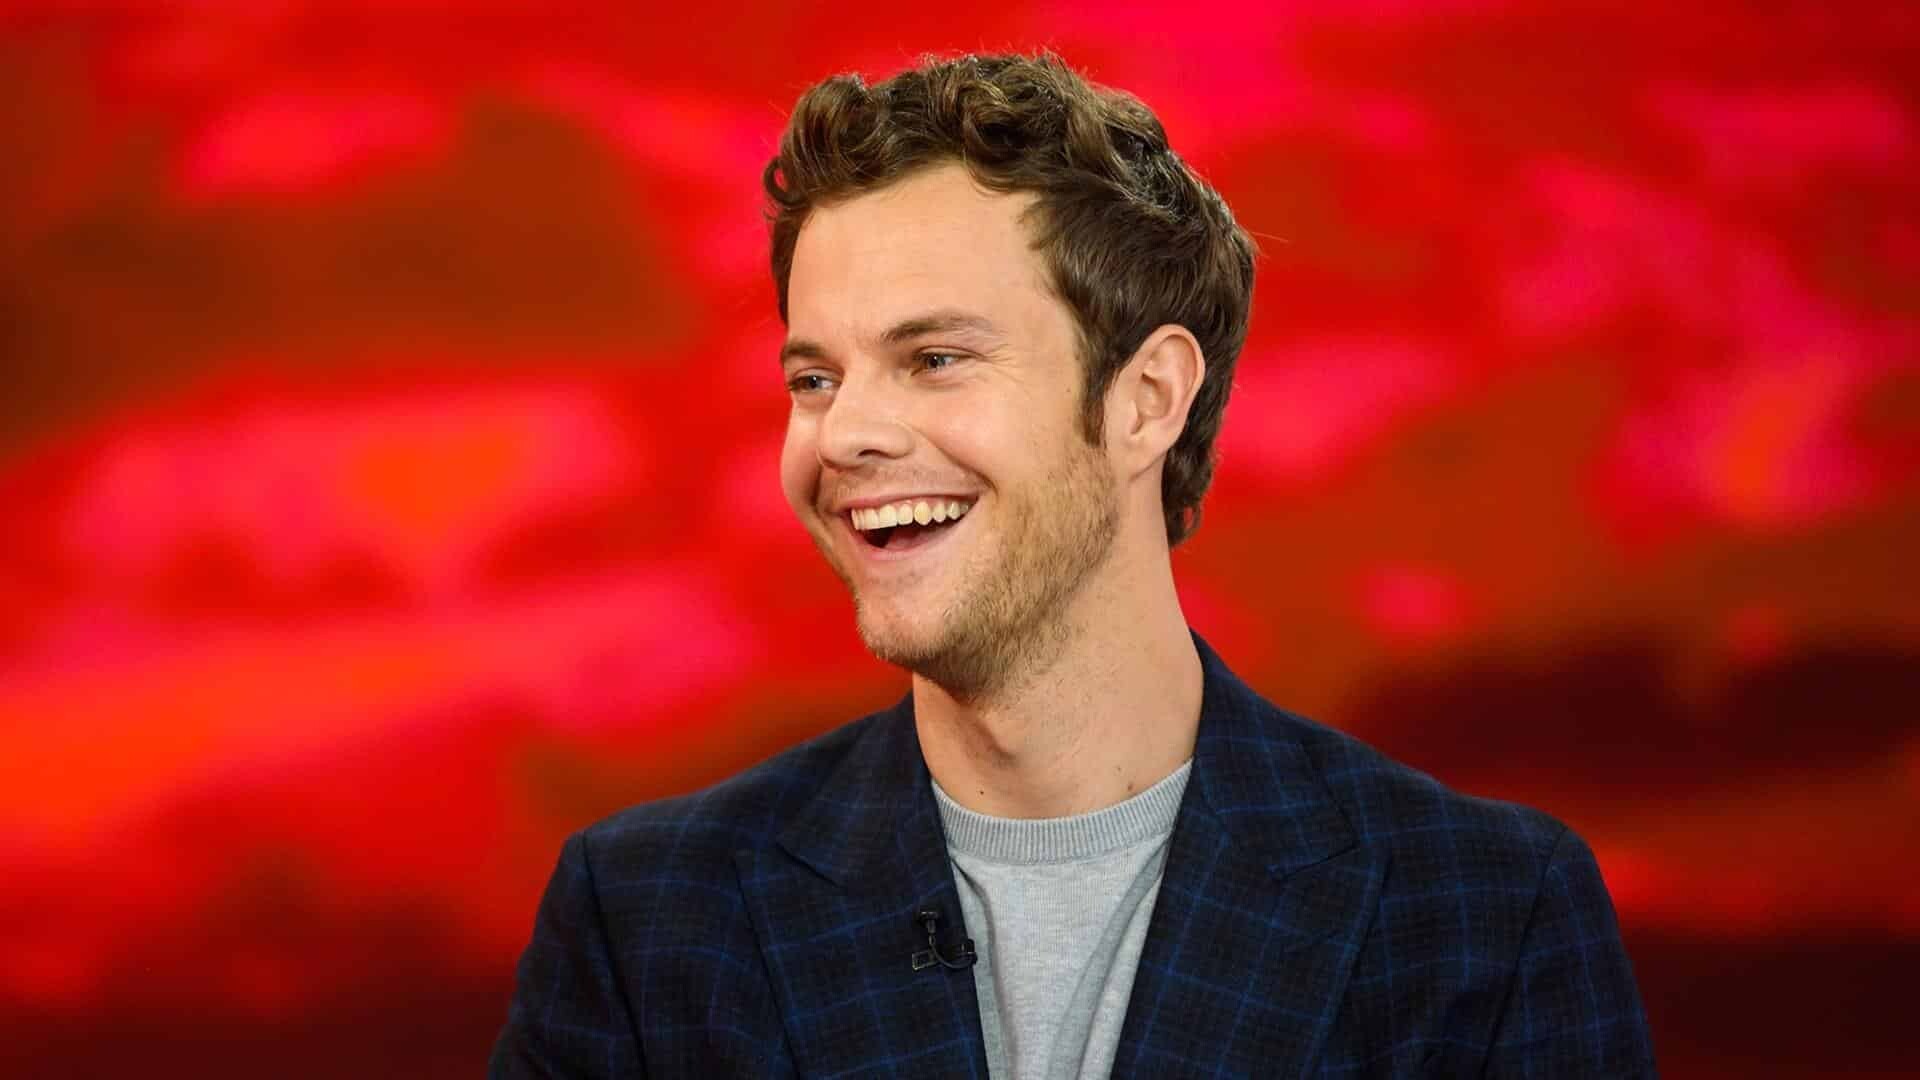 Scream 5 movie, Jack Quaid casting, The Boys actor, Exciting new role, 1920x1080 Full HD Desktop